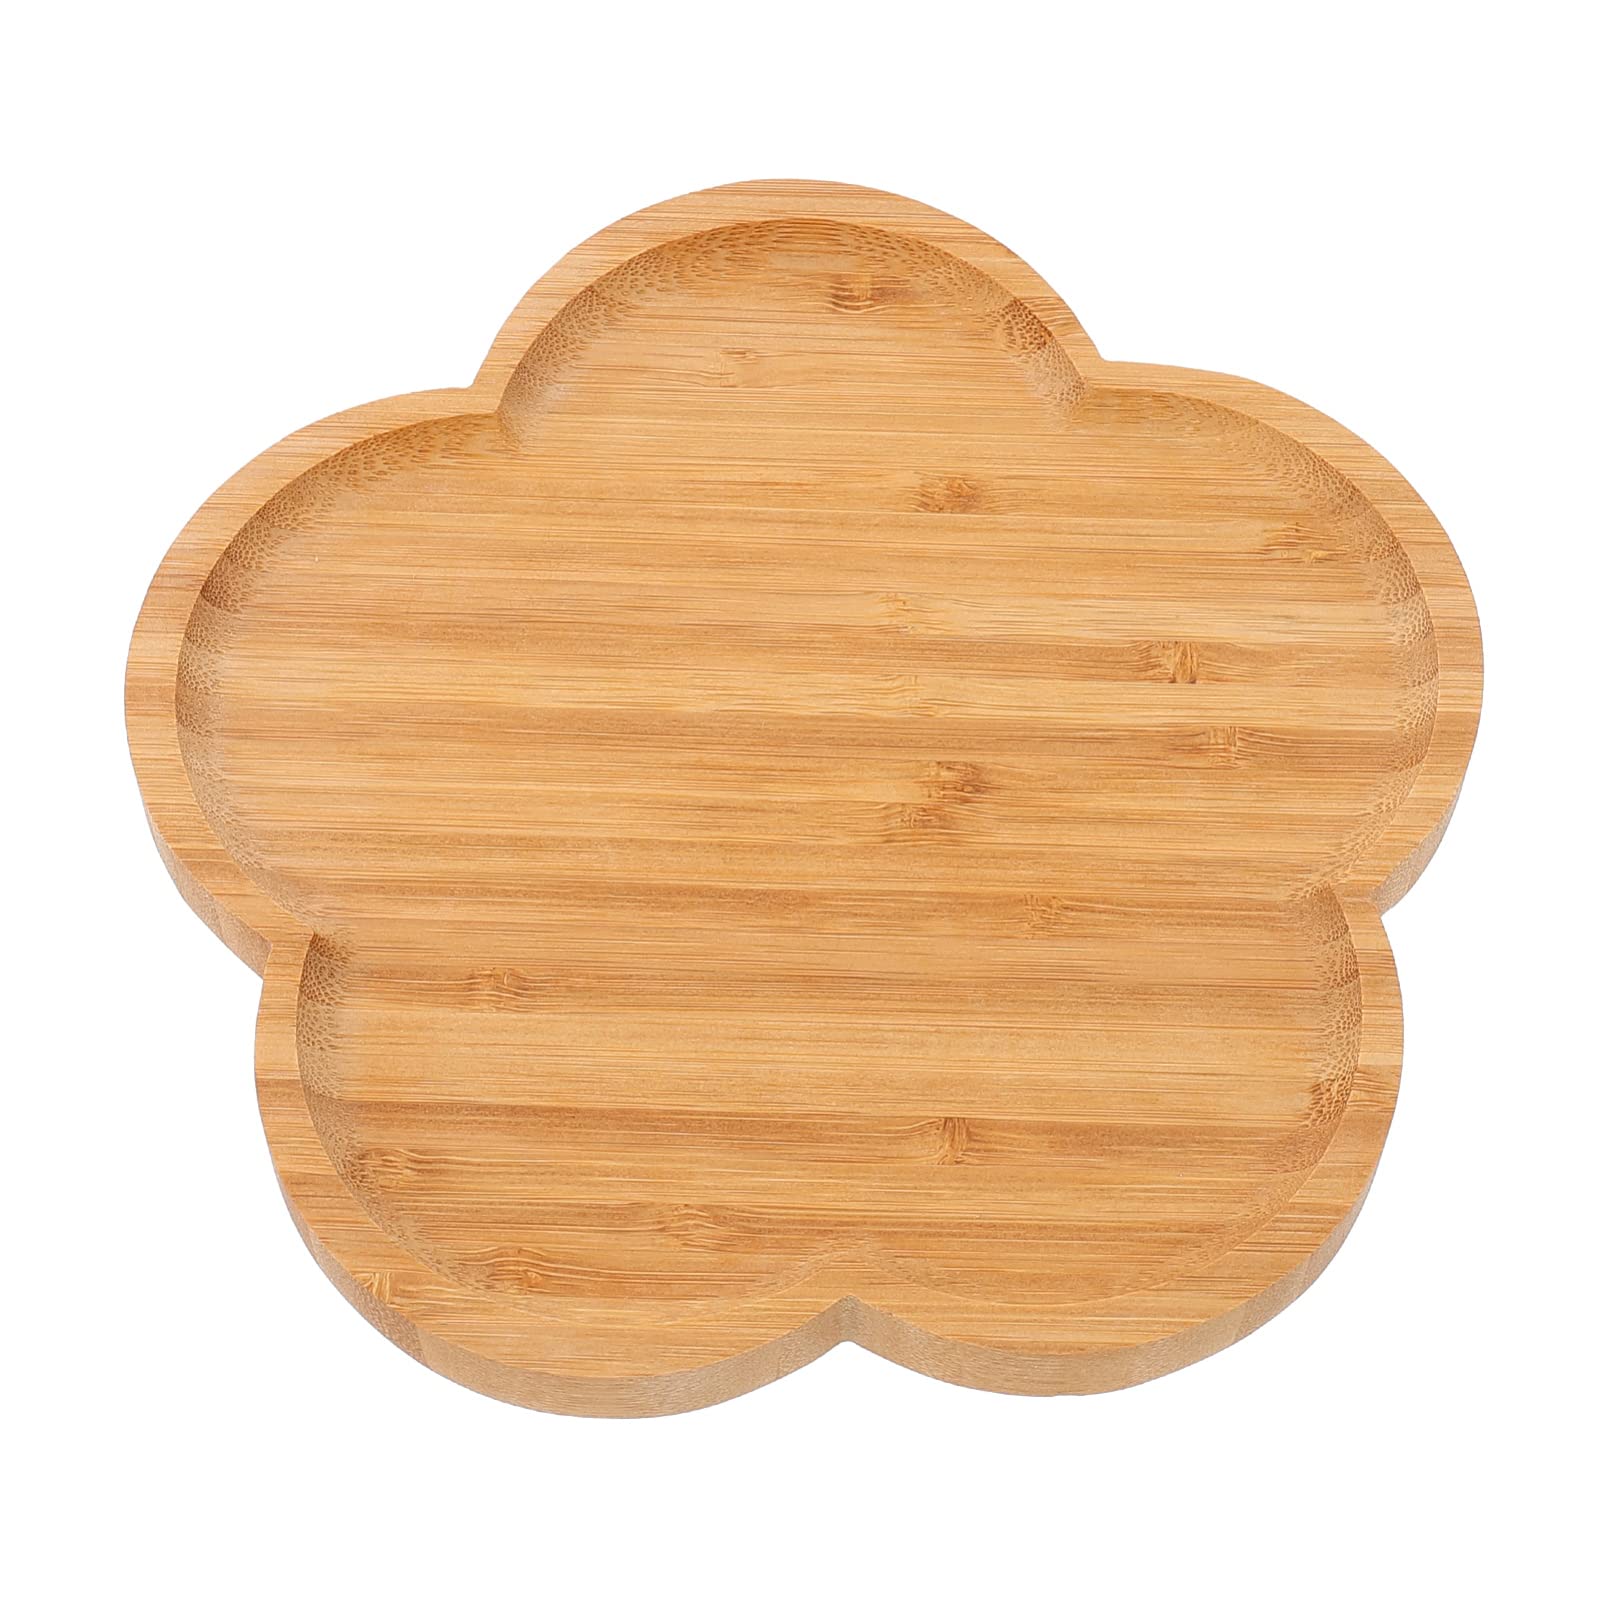 Hemoton Wood Serving Tray Flower Shaped Dessert Plate Food Tray Dinner Plate Serving Platter Appetizer Plates for Steak Fish Seafood Cooking Baking Yellow